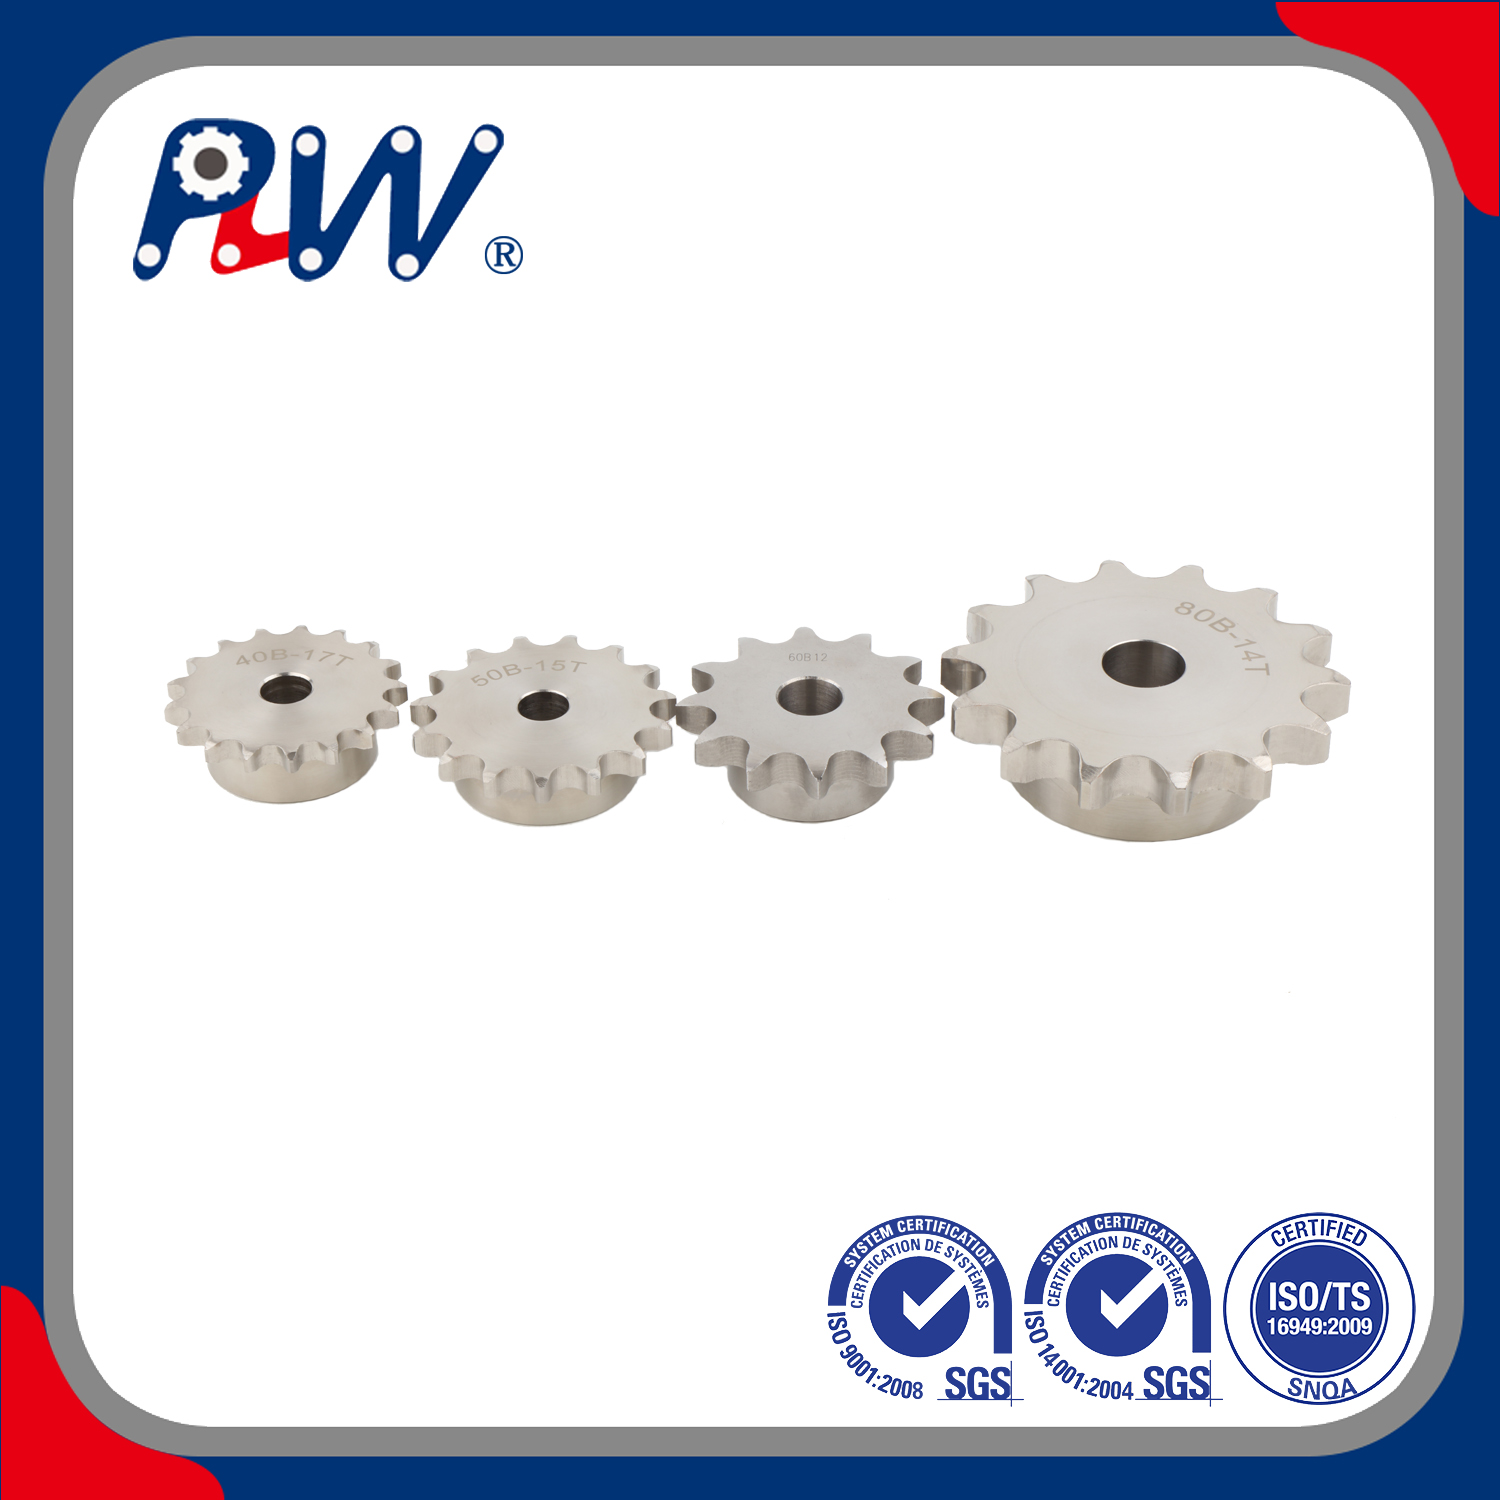 Food Packing Industry ANSI, DIN, ISO, Standard Investment Casting Stainless Steel Driving Sprocket